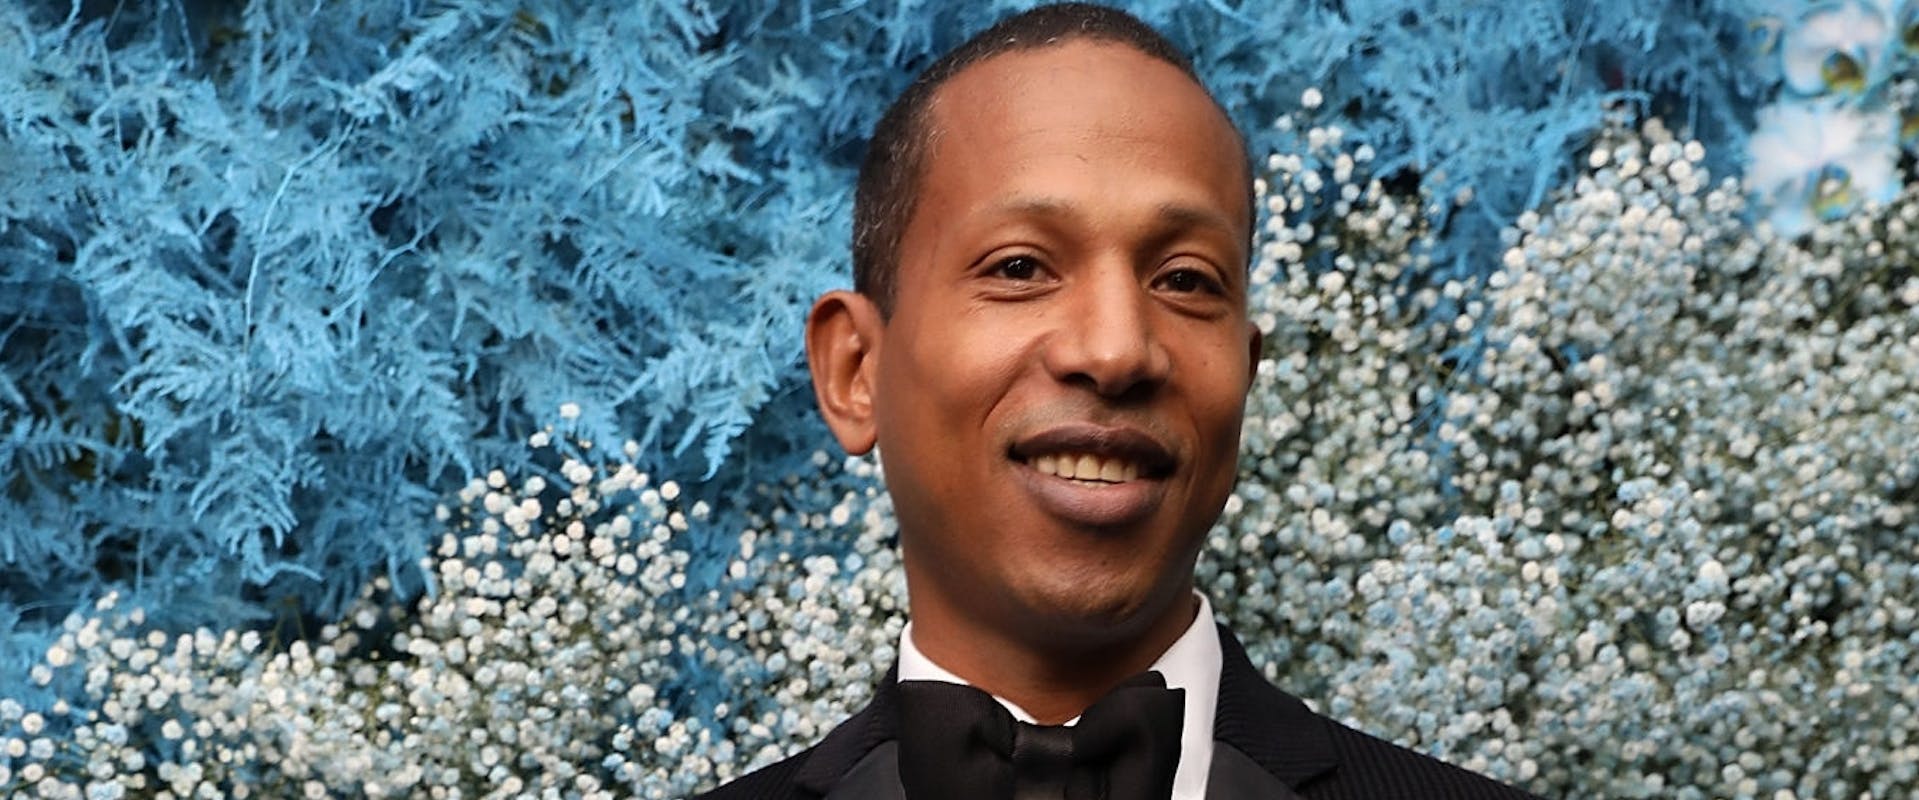 Shyne attends 40/40 Club Celebrates 18-Year Anniversary With Star-Studded Event at 40 / 40 Club on August 28, 2021 in New York City.